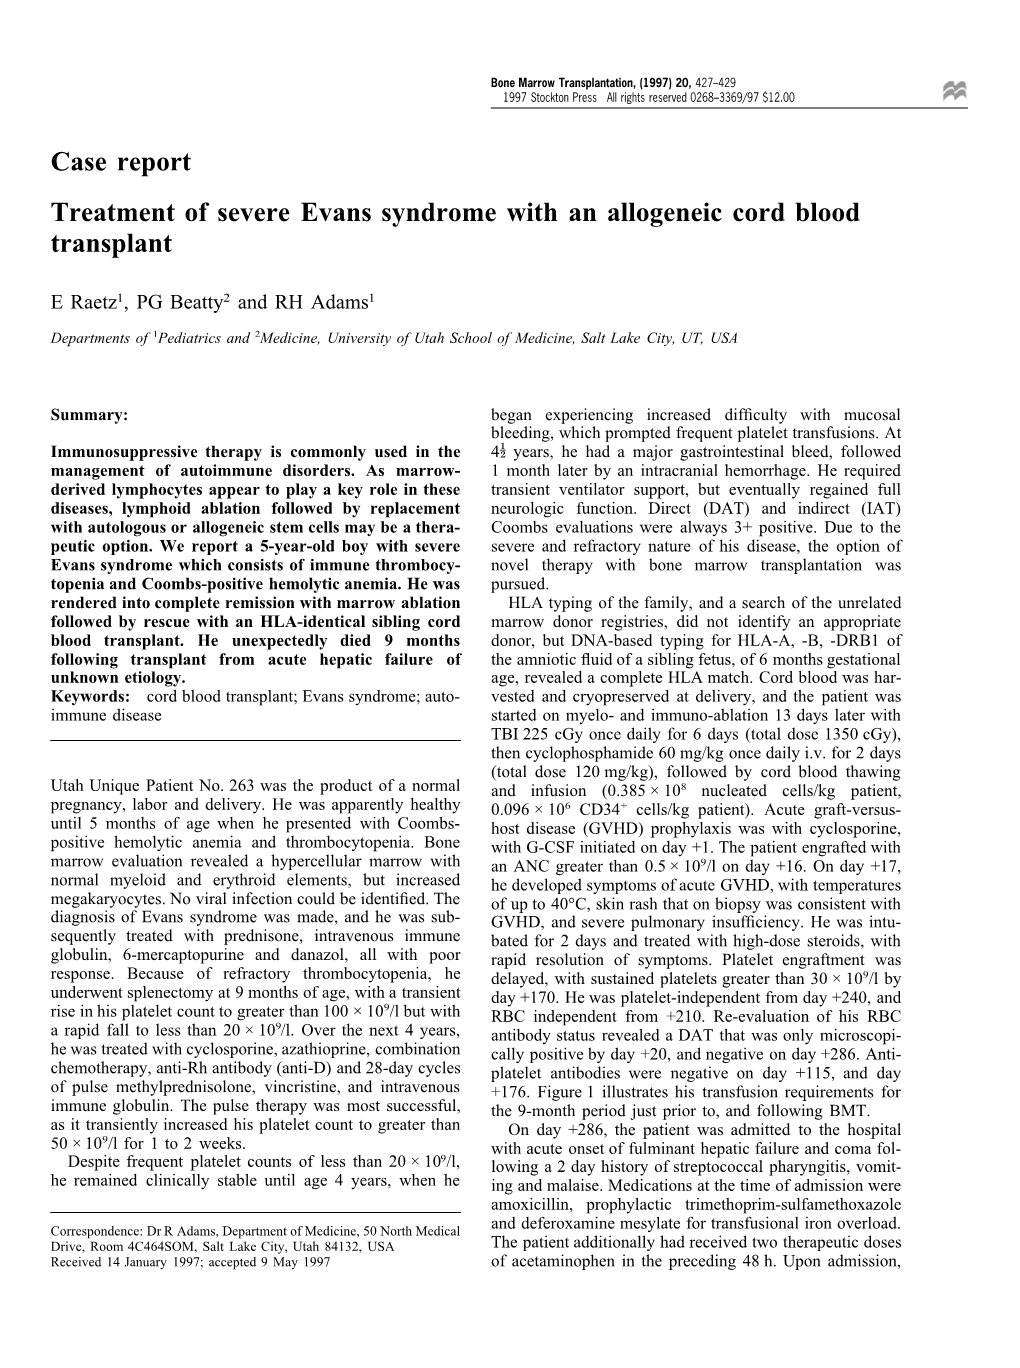 Case Report Treatment of Severe Evans Syndrome with an Allogeneic Cord Blood Transplant